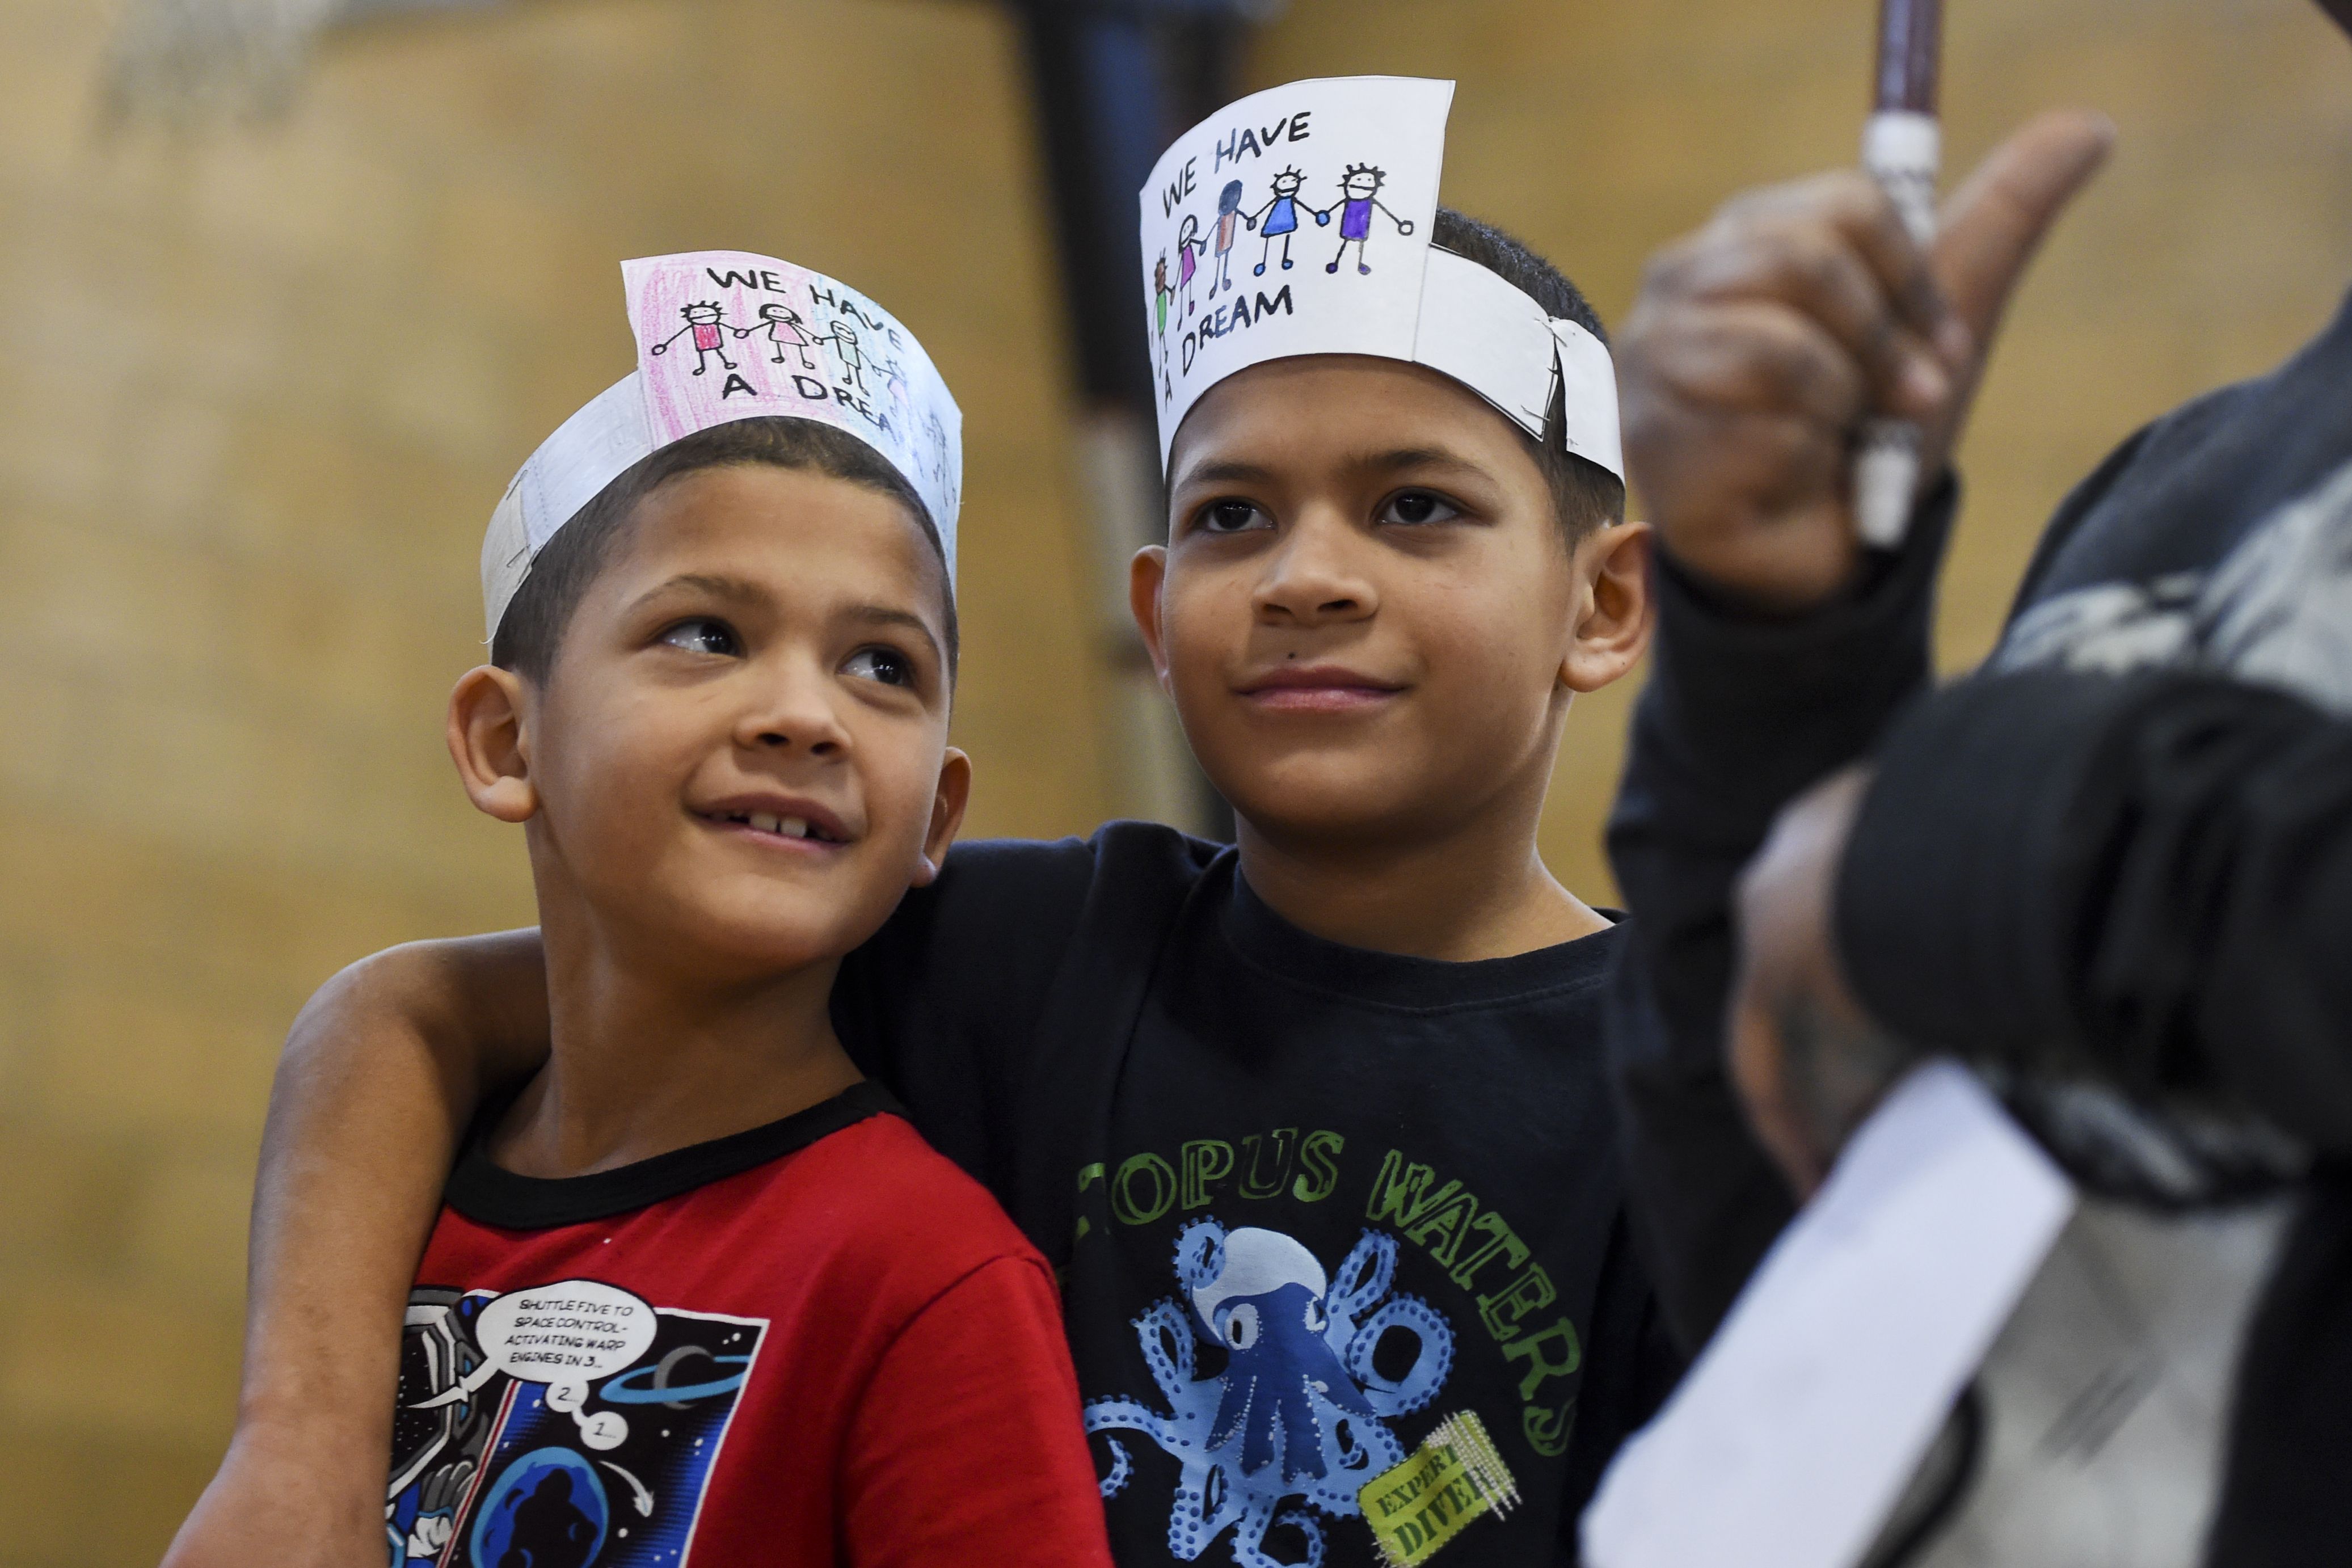 Javen Lopez, 9, left, smiles with his brother, Julian, 11, during a Martin Luther King Jr. birthday celebration.